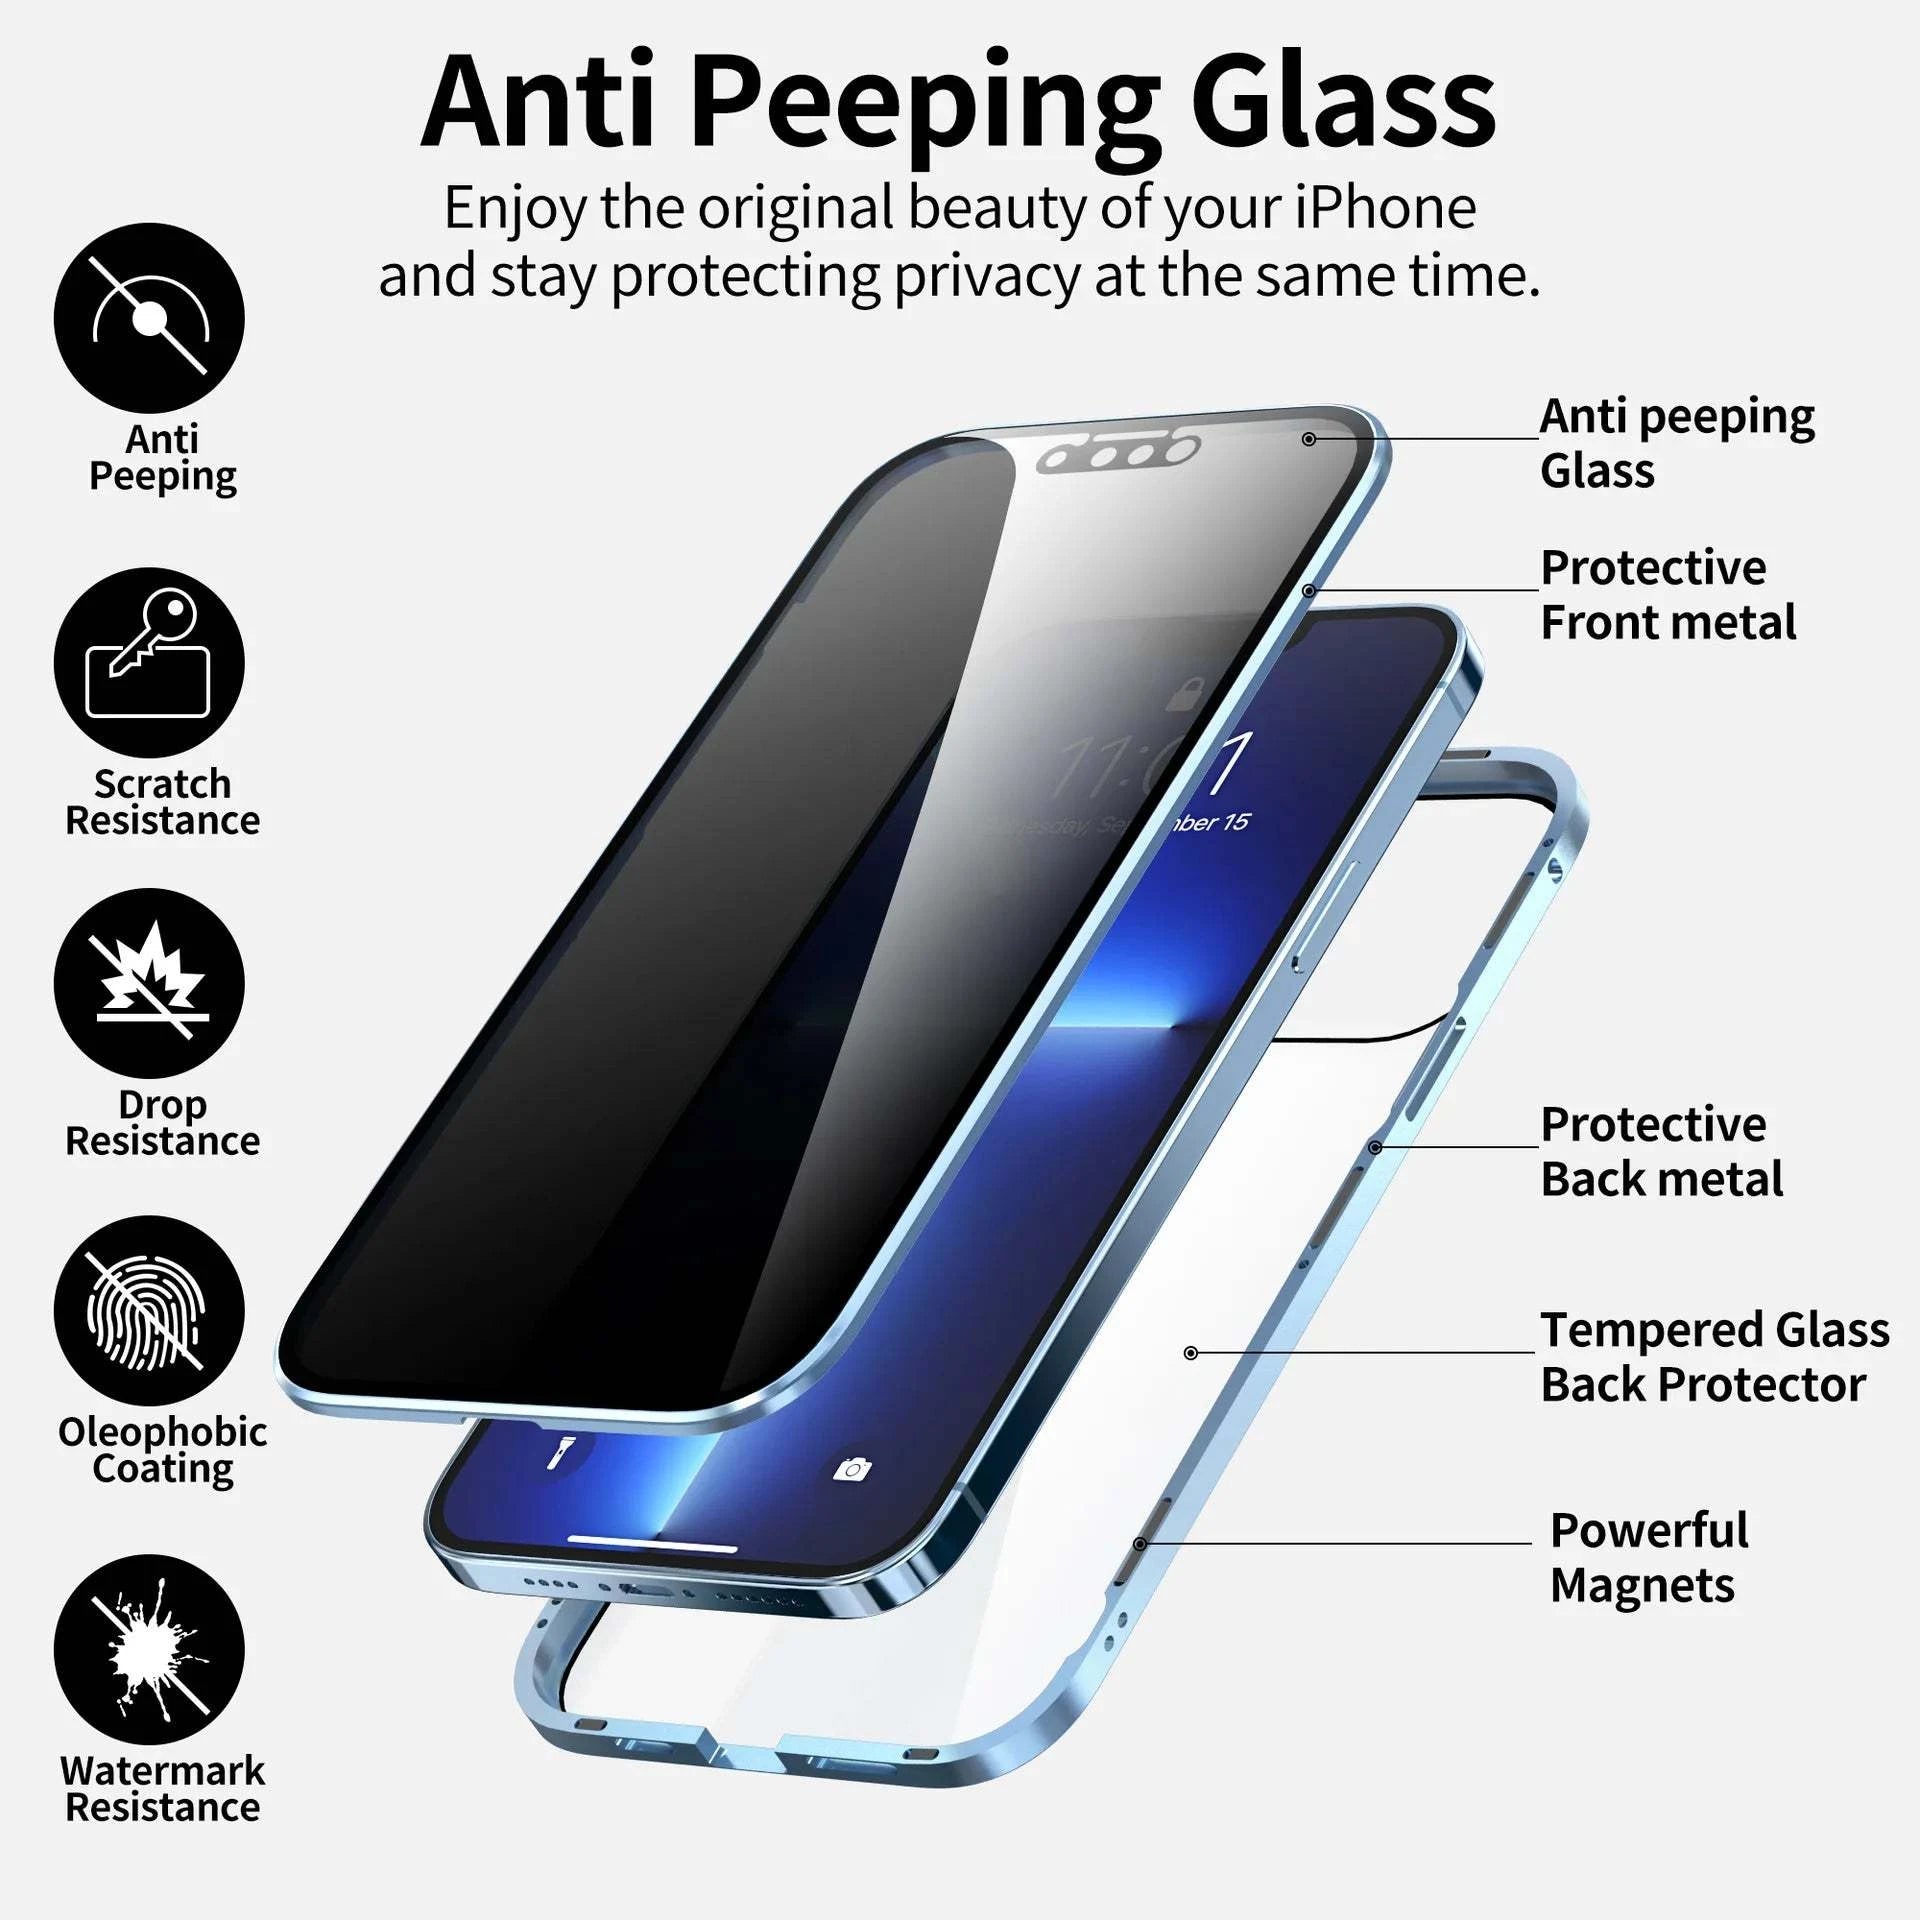 Anti Peep Privacy Case for iPhone 14 13 12 with Tempered Glass Anti Sp